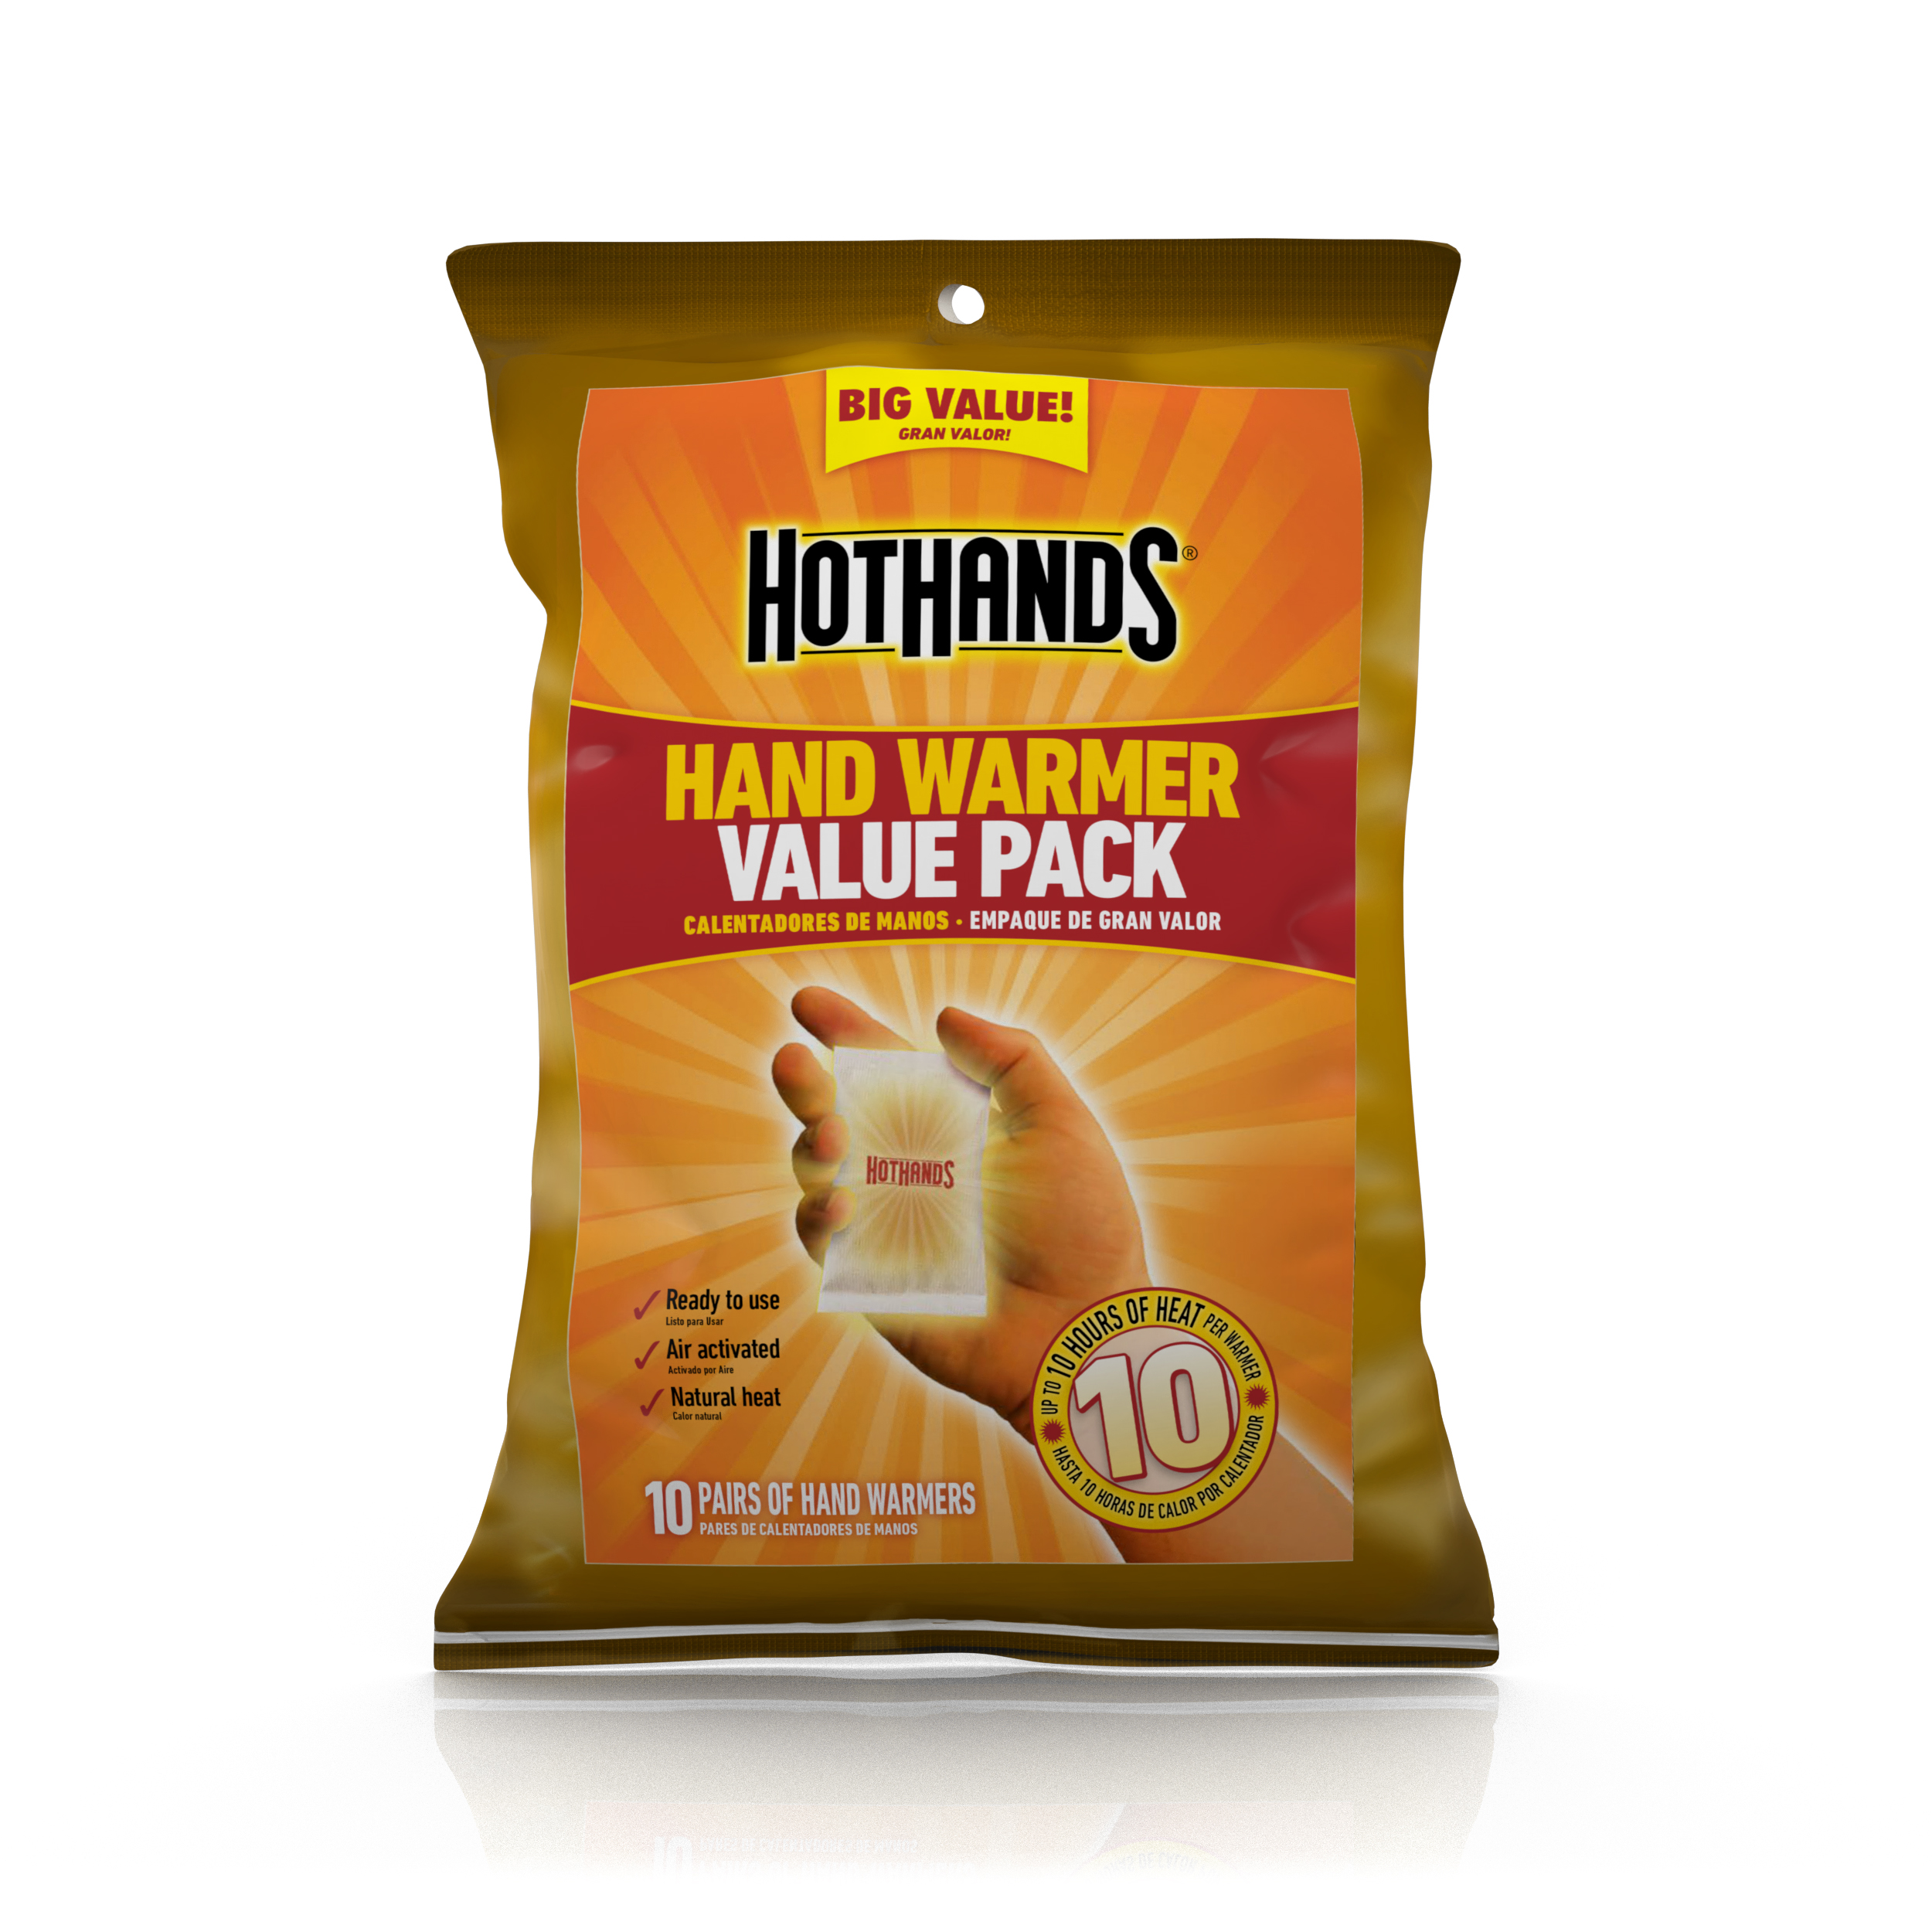 HotHands Hand Warmer 10-Pair Value Pack - image 1 of 6